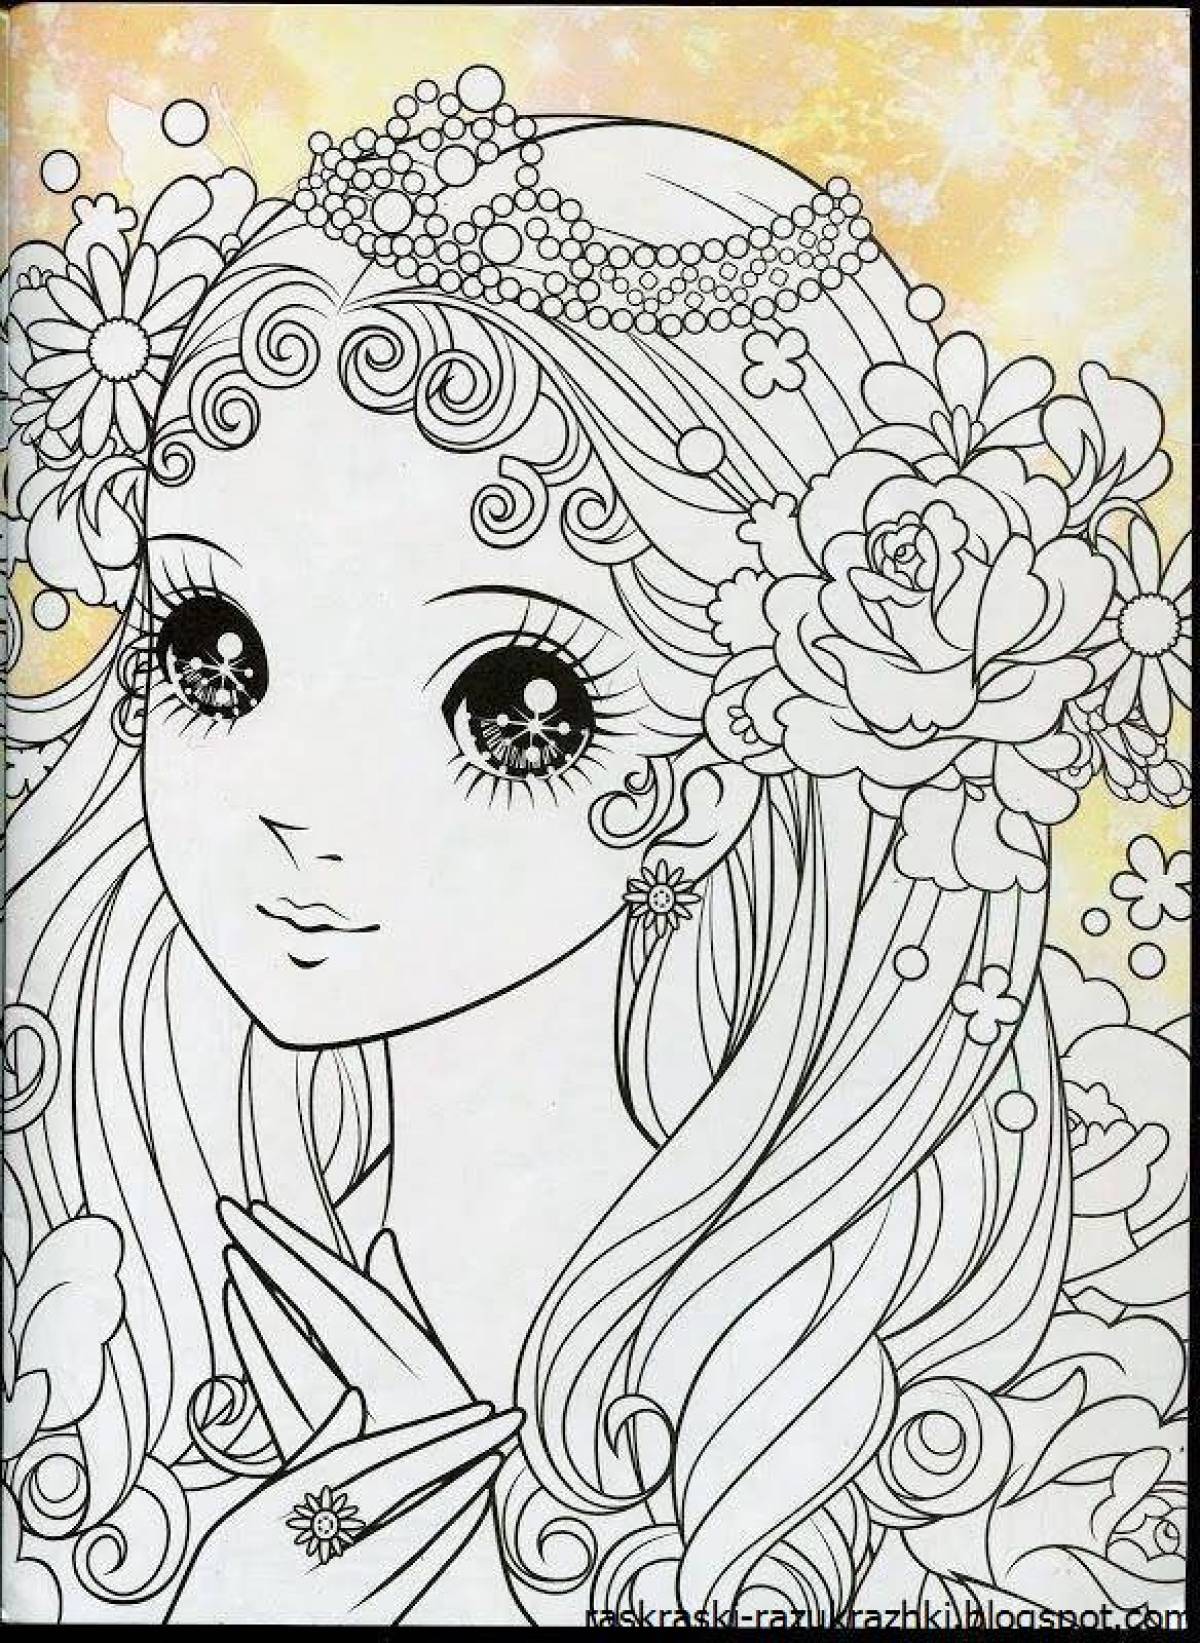 Joyful coloring for girls 8 years old